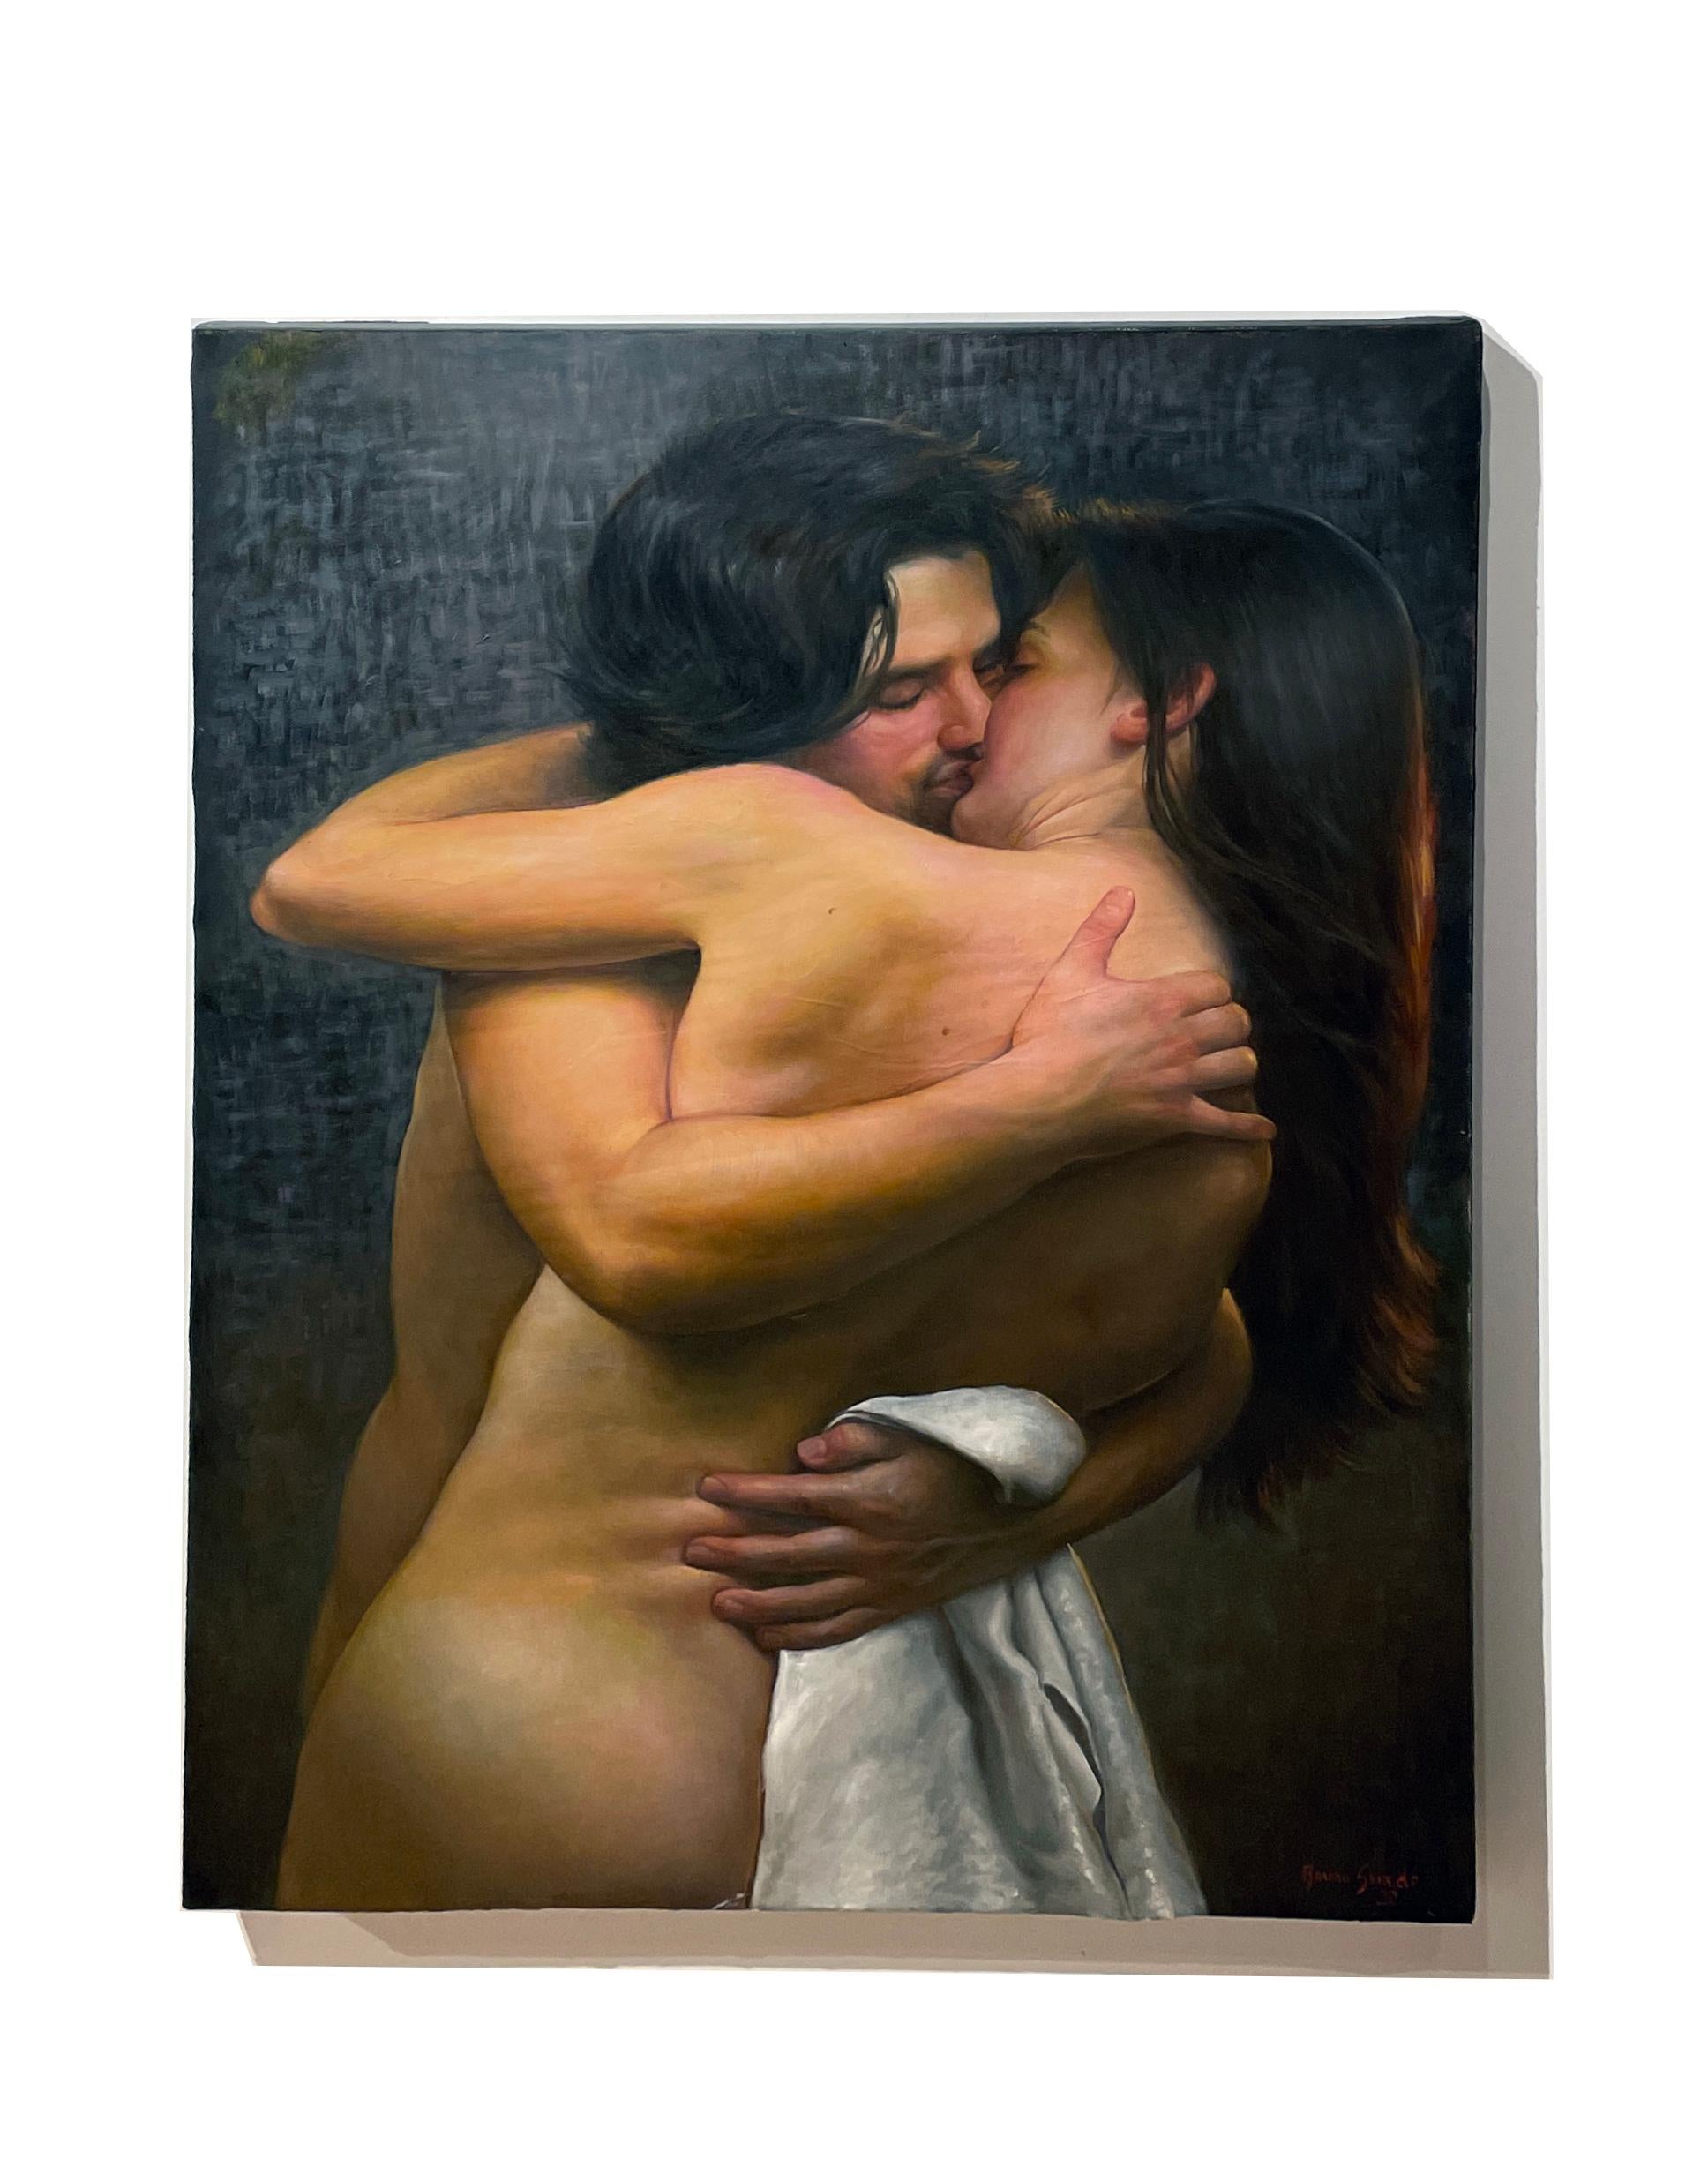 Desire - Nude Lovers Entangled in a Passionate Kiss, Oil on Paper on Canvas - Black Nude Painting by Bruno Surdo